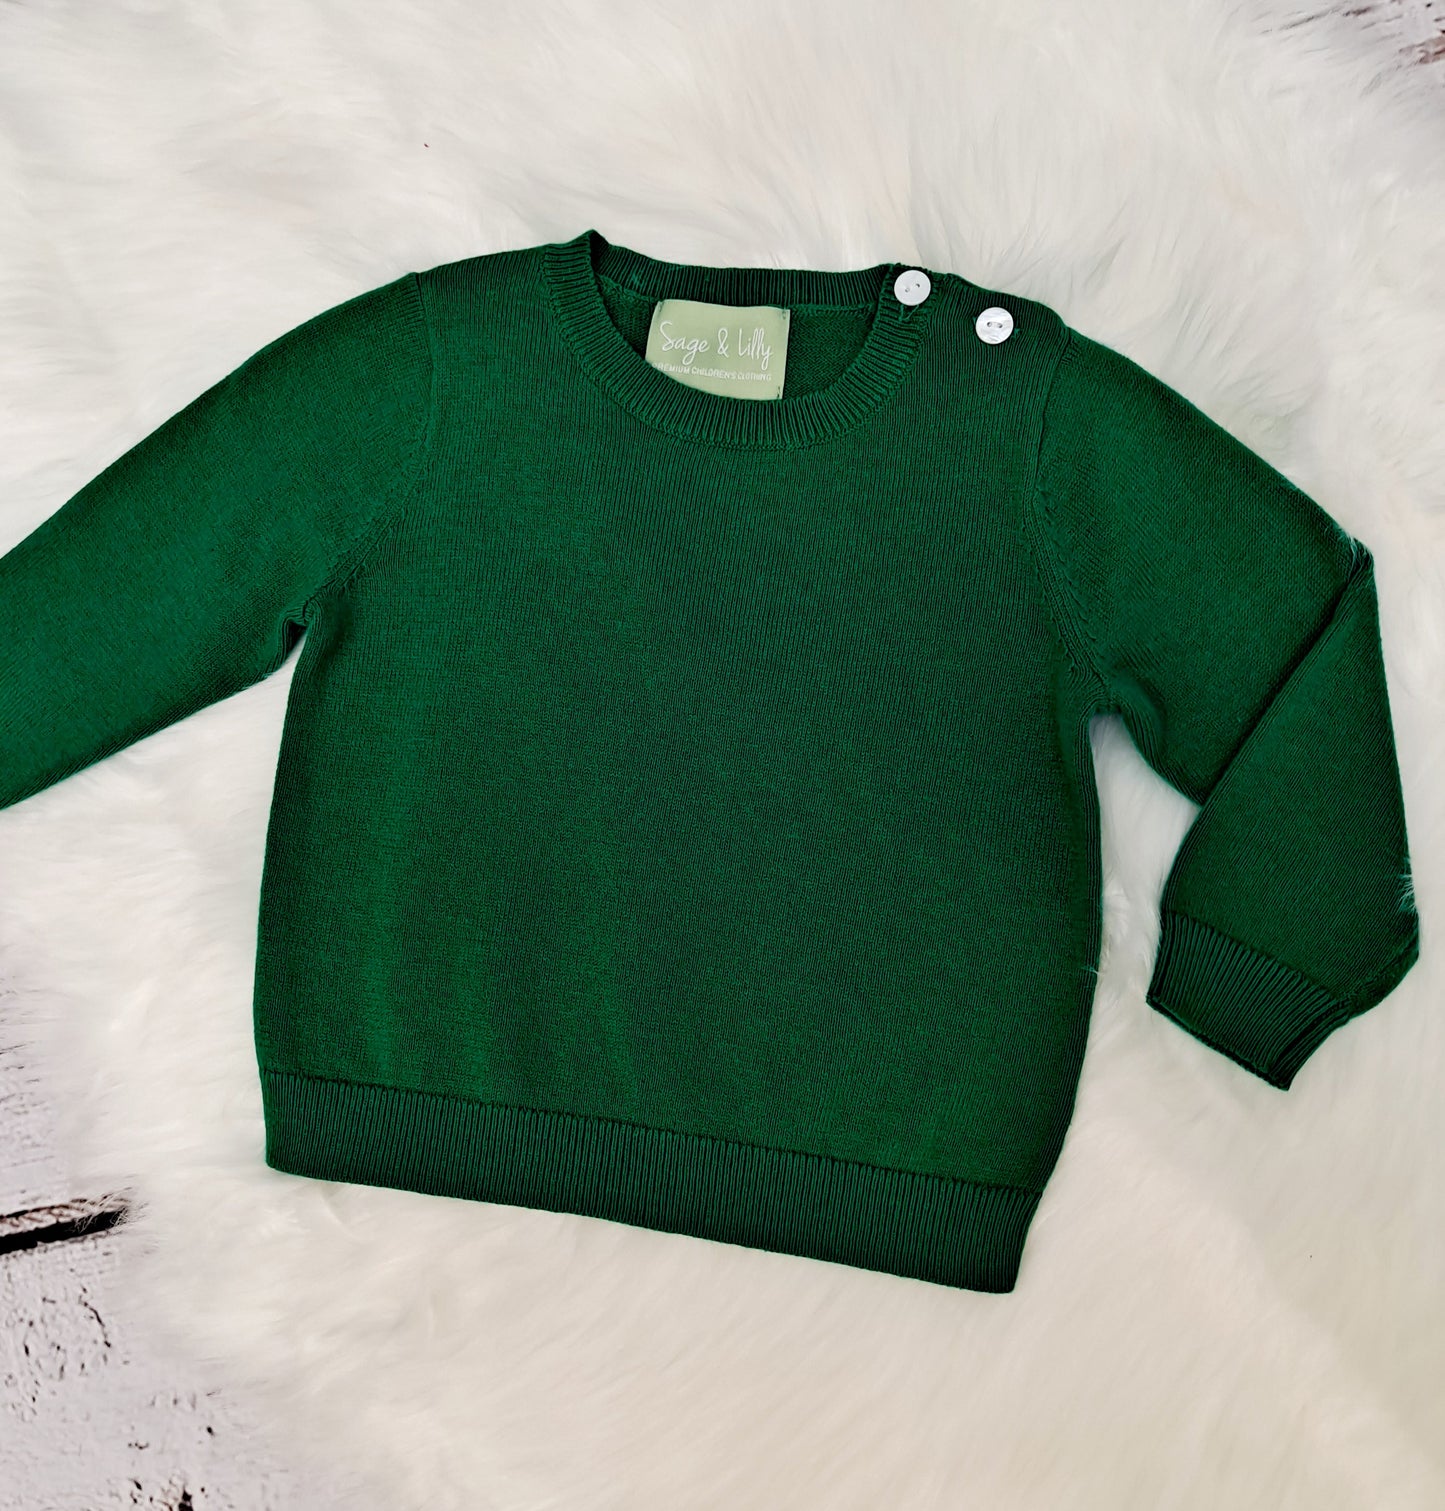 Sage & Lilly - Green Sweater